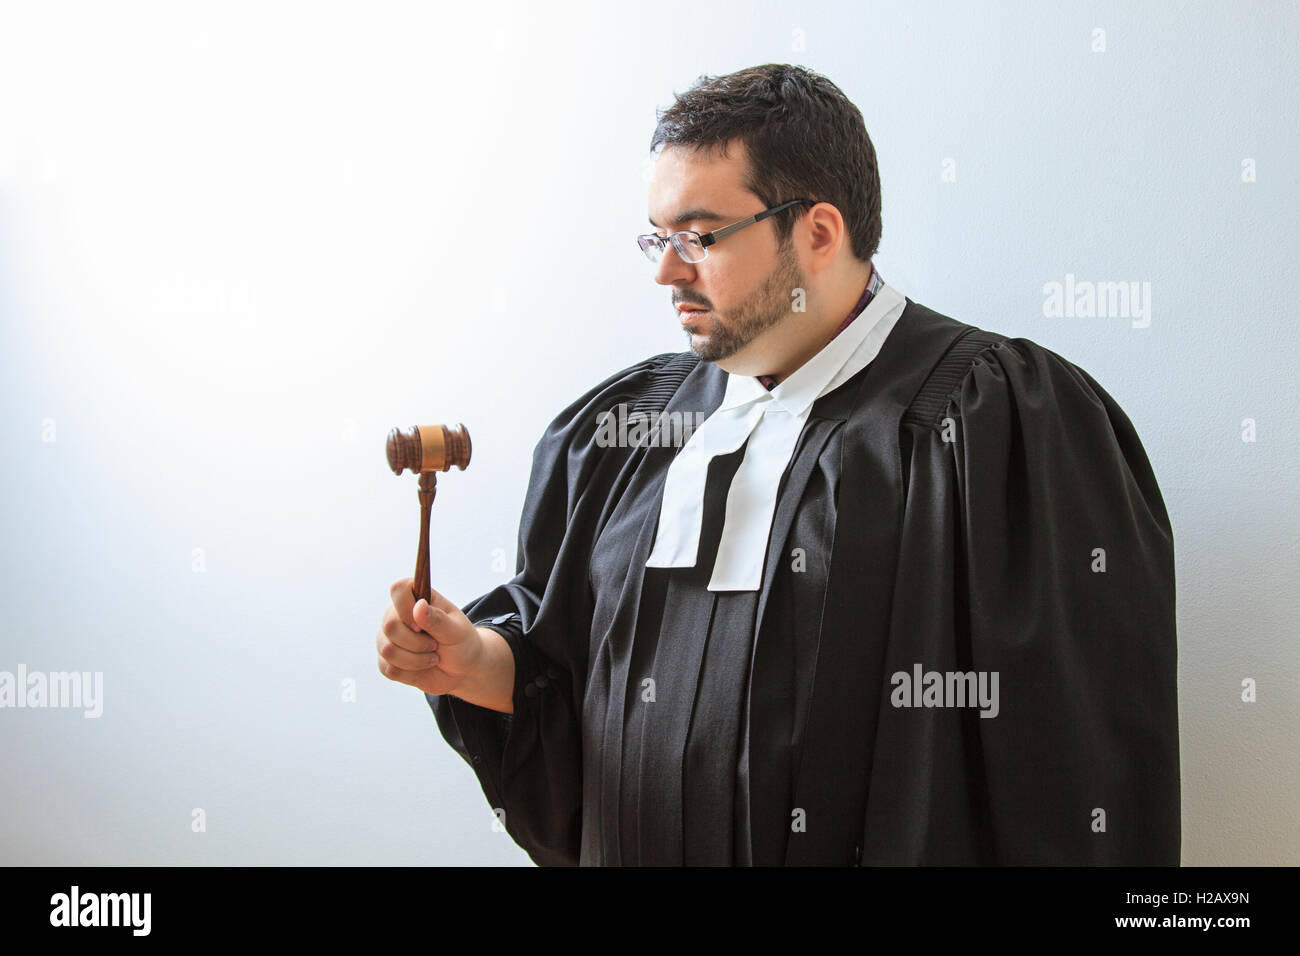 concentrating on the gavel Stock Photo